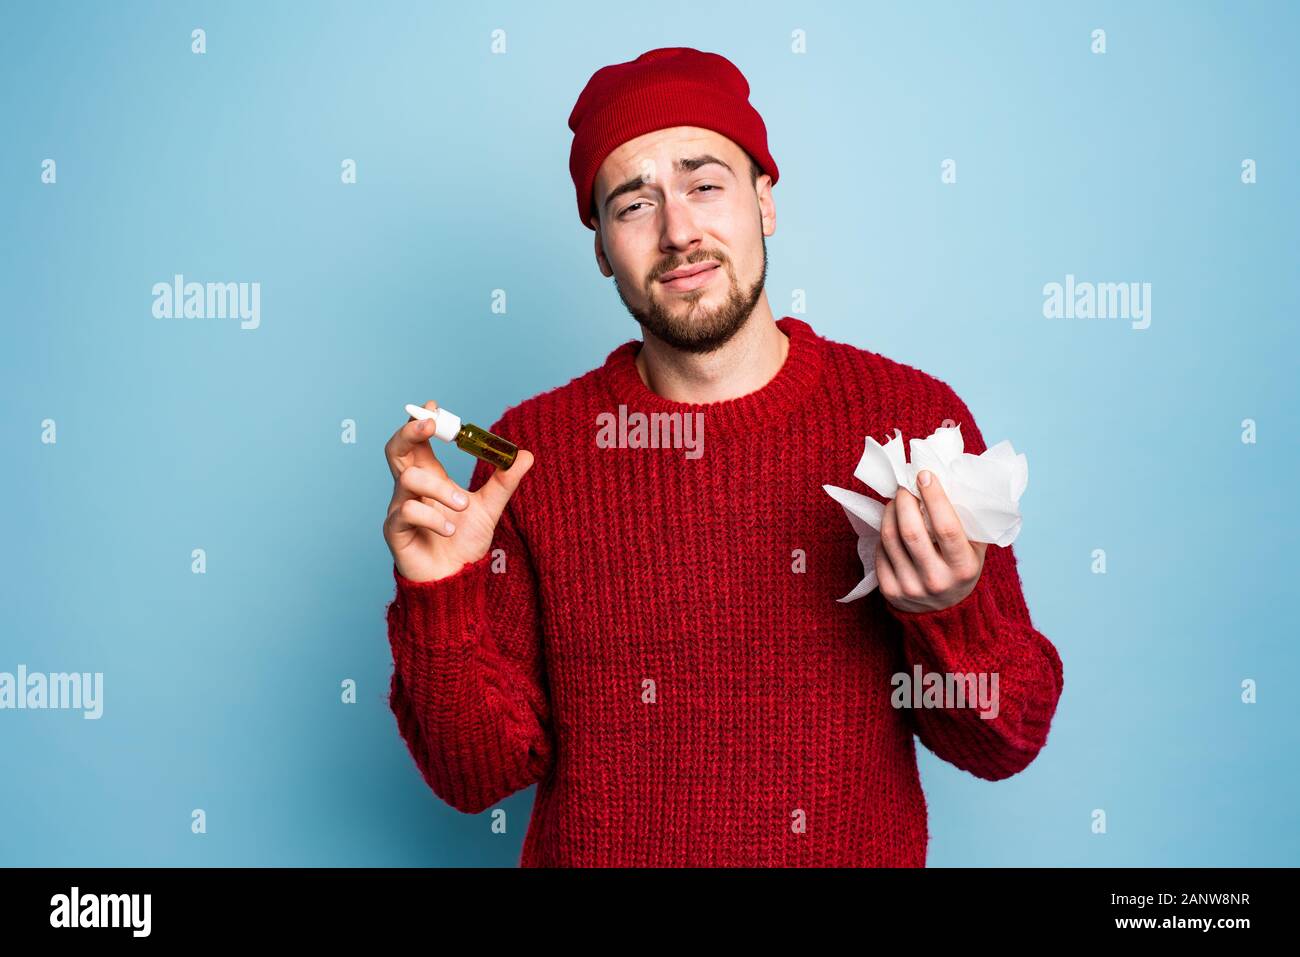 Boy caught a cold and uses spray to heal. Studio on Cyan background Stock Photo